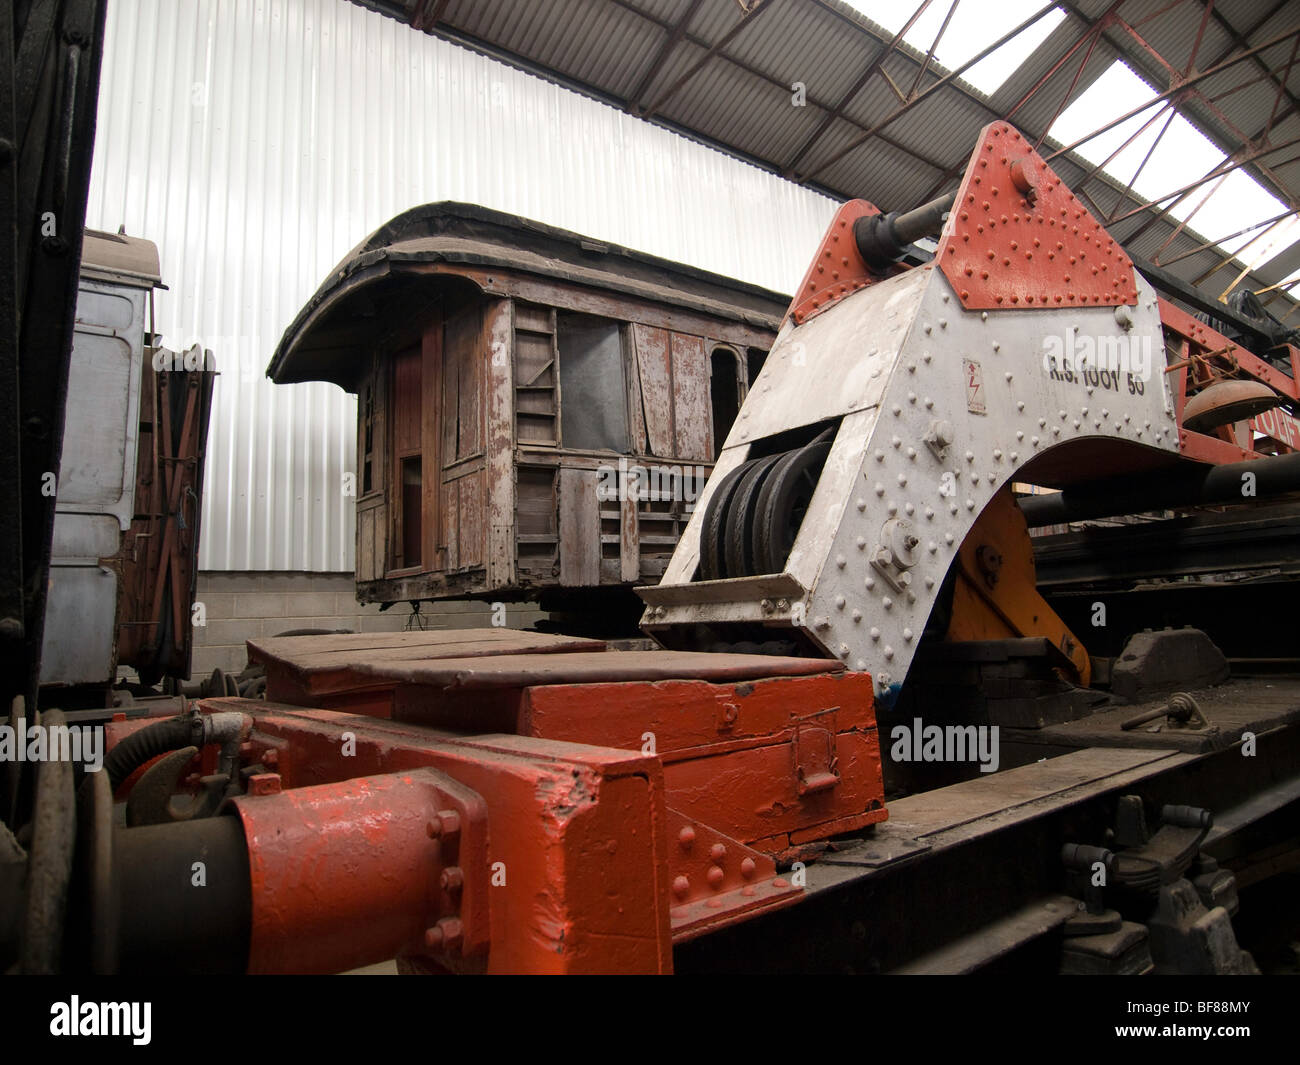 Image taken at the Midland Rail Centre using an Olympus E3 in raw format Stock Photo